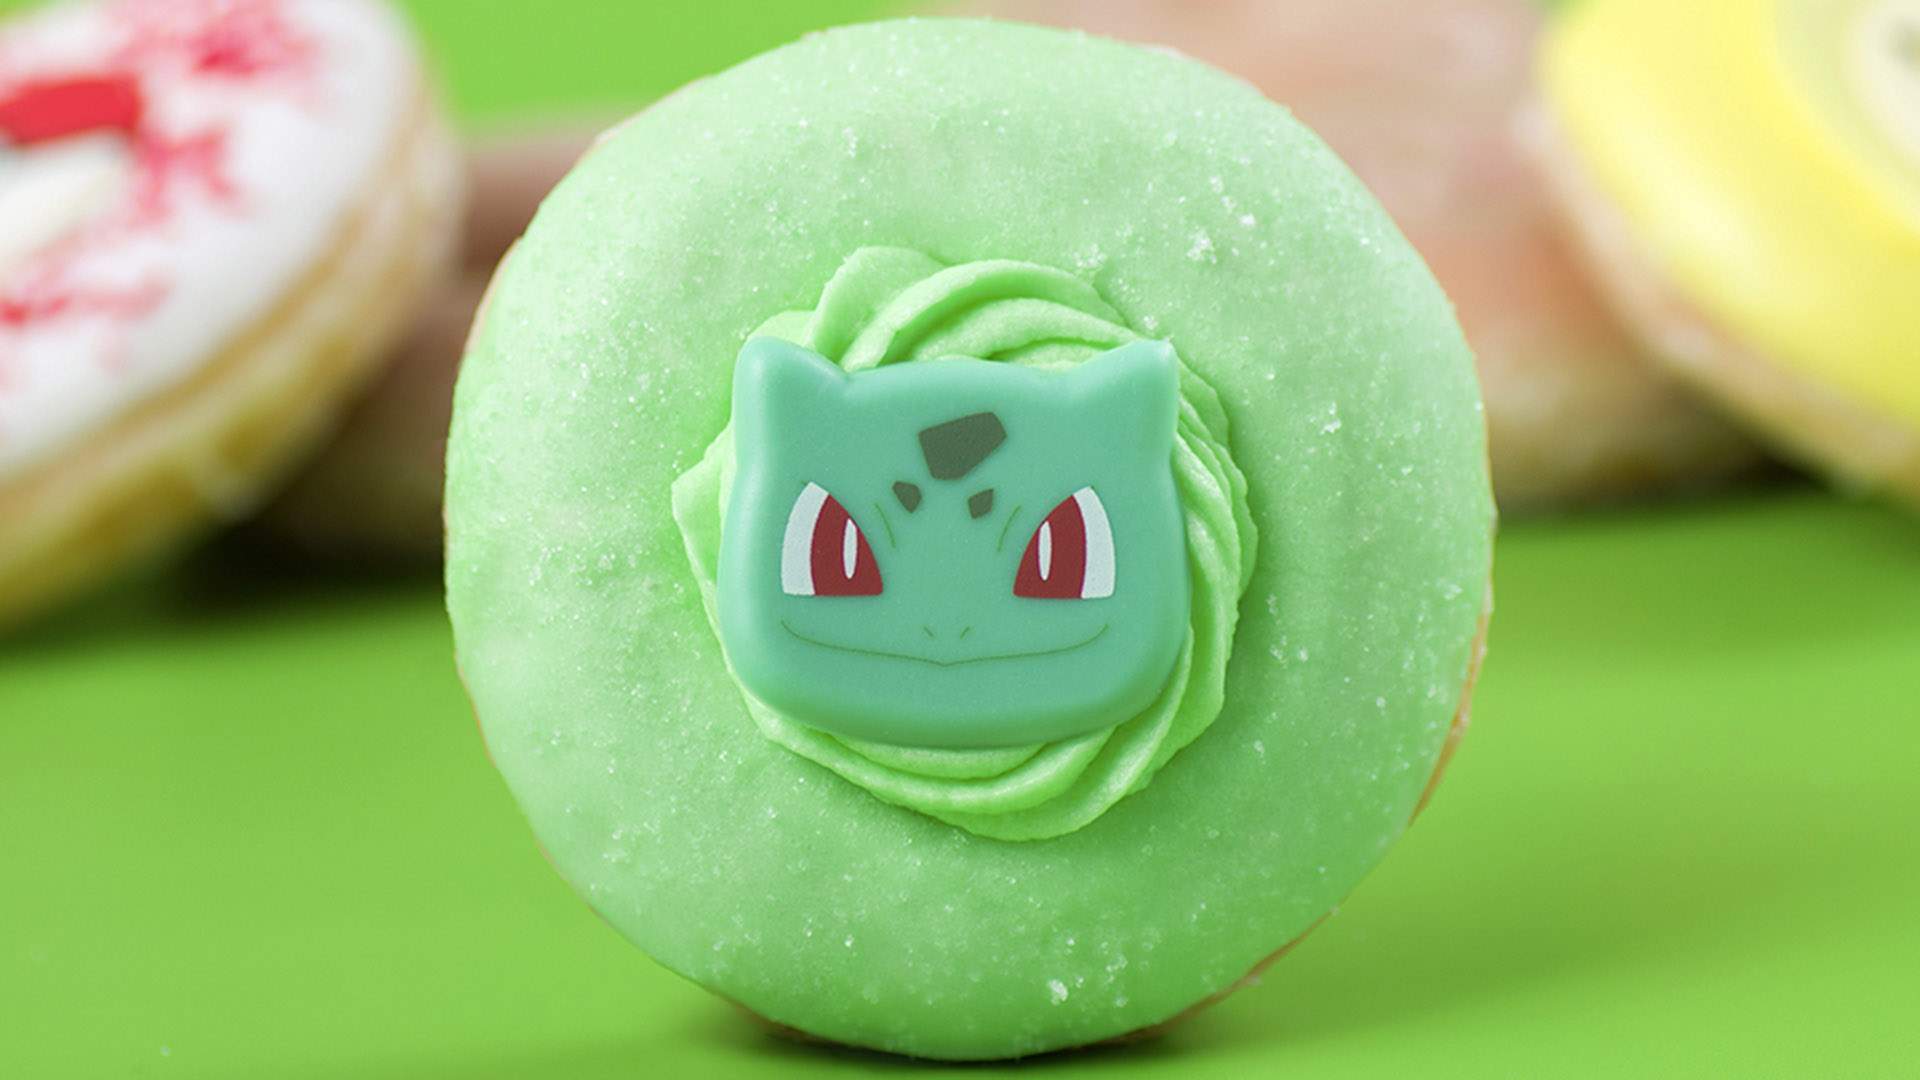 Krispy Kreme Has Started Serving 'Pokemon'-Themed Doughnuts and You'll Want to Eat 'Em All